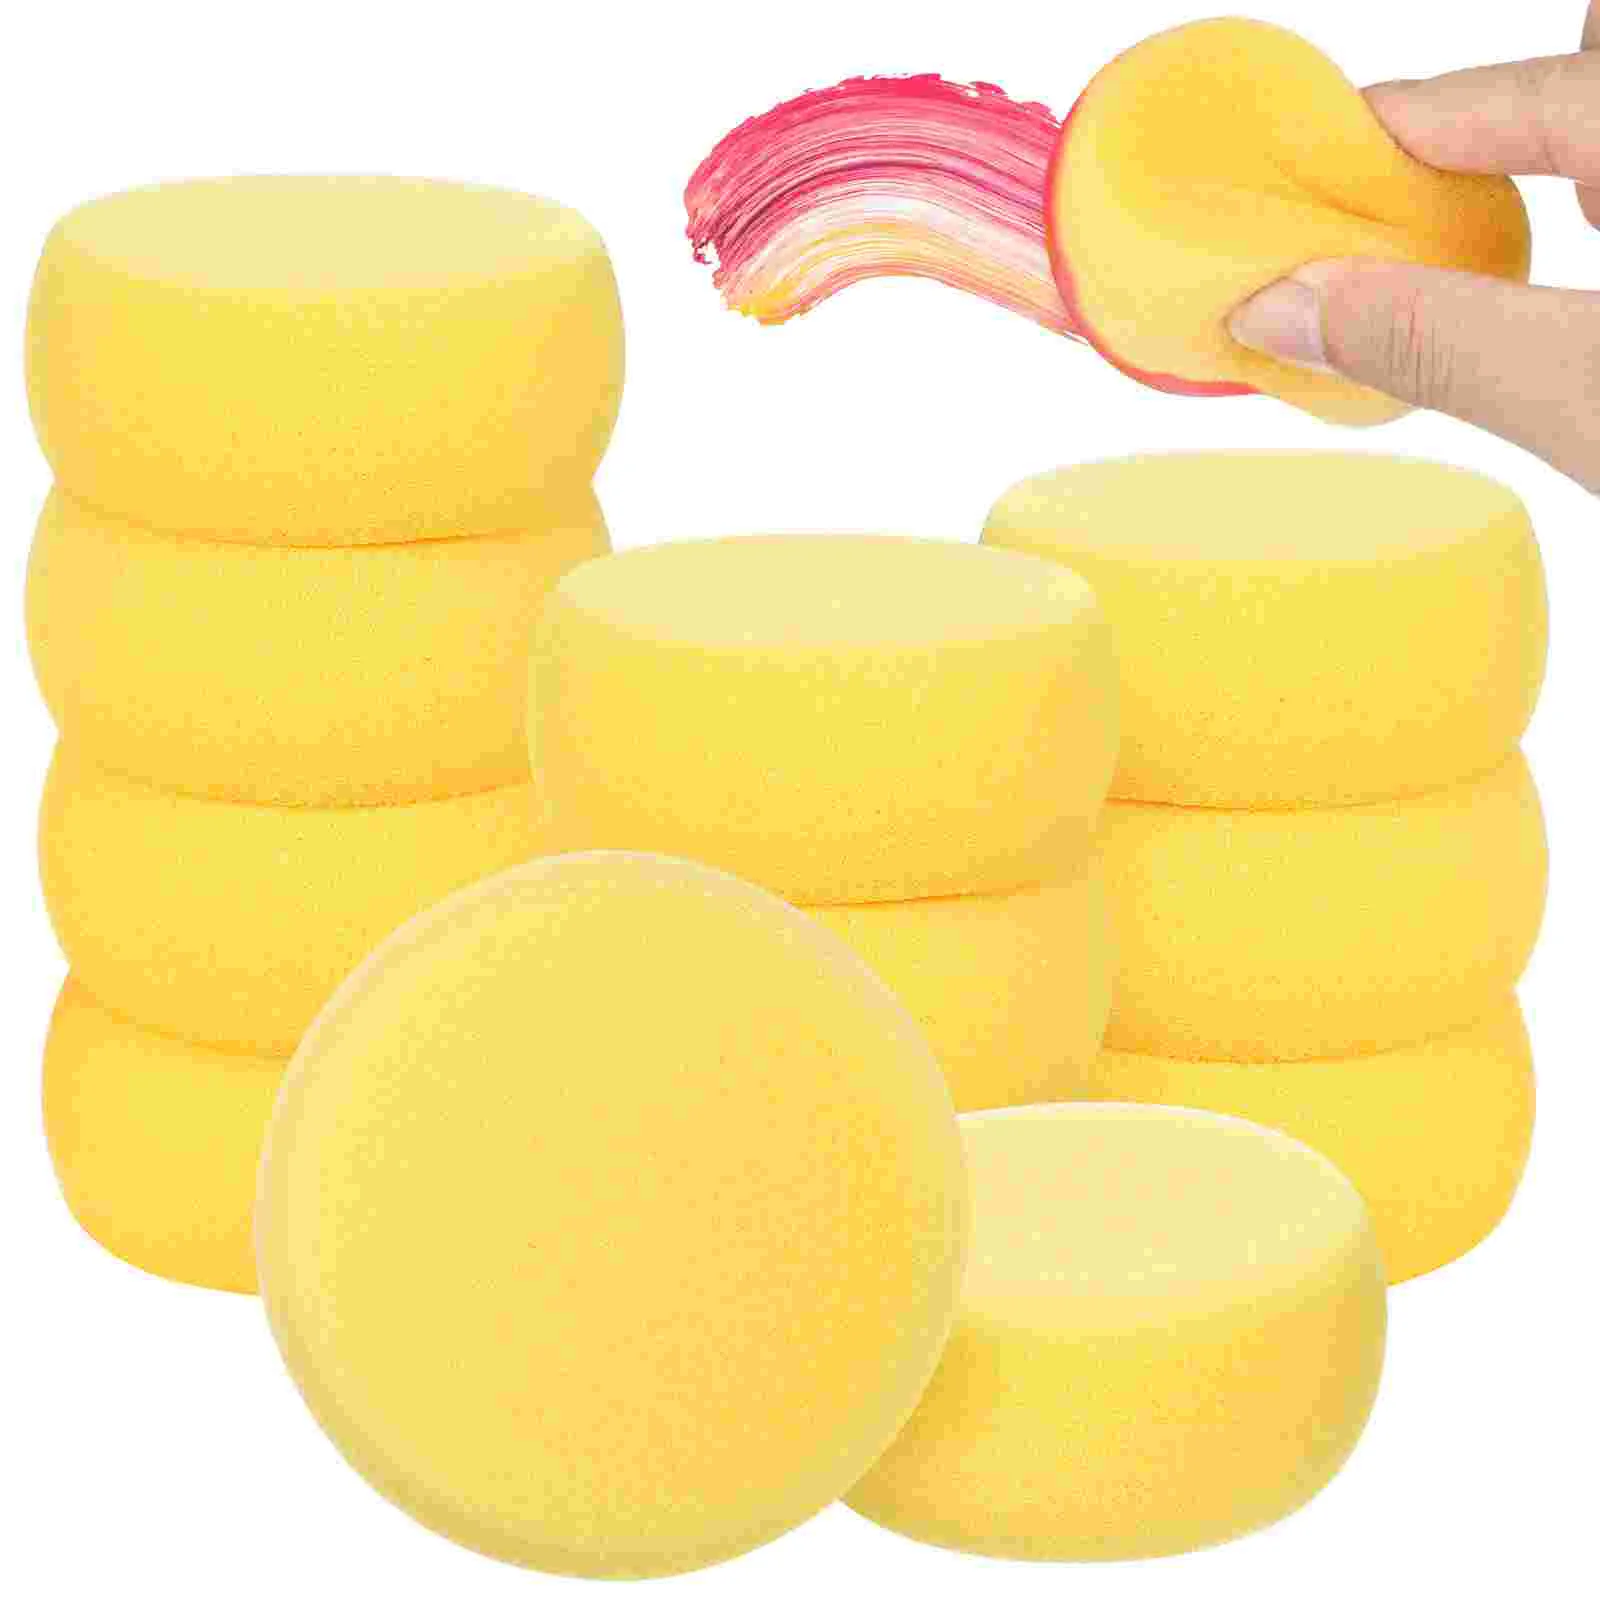 

Yellow Round Cake Sponge Round Synthetic Watercolor Artist Sponges For Facial Spongesing Crafts Pottery Round Cake